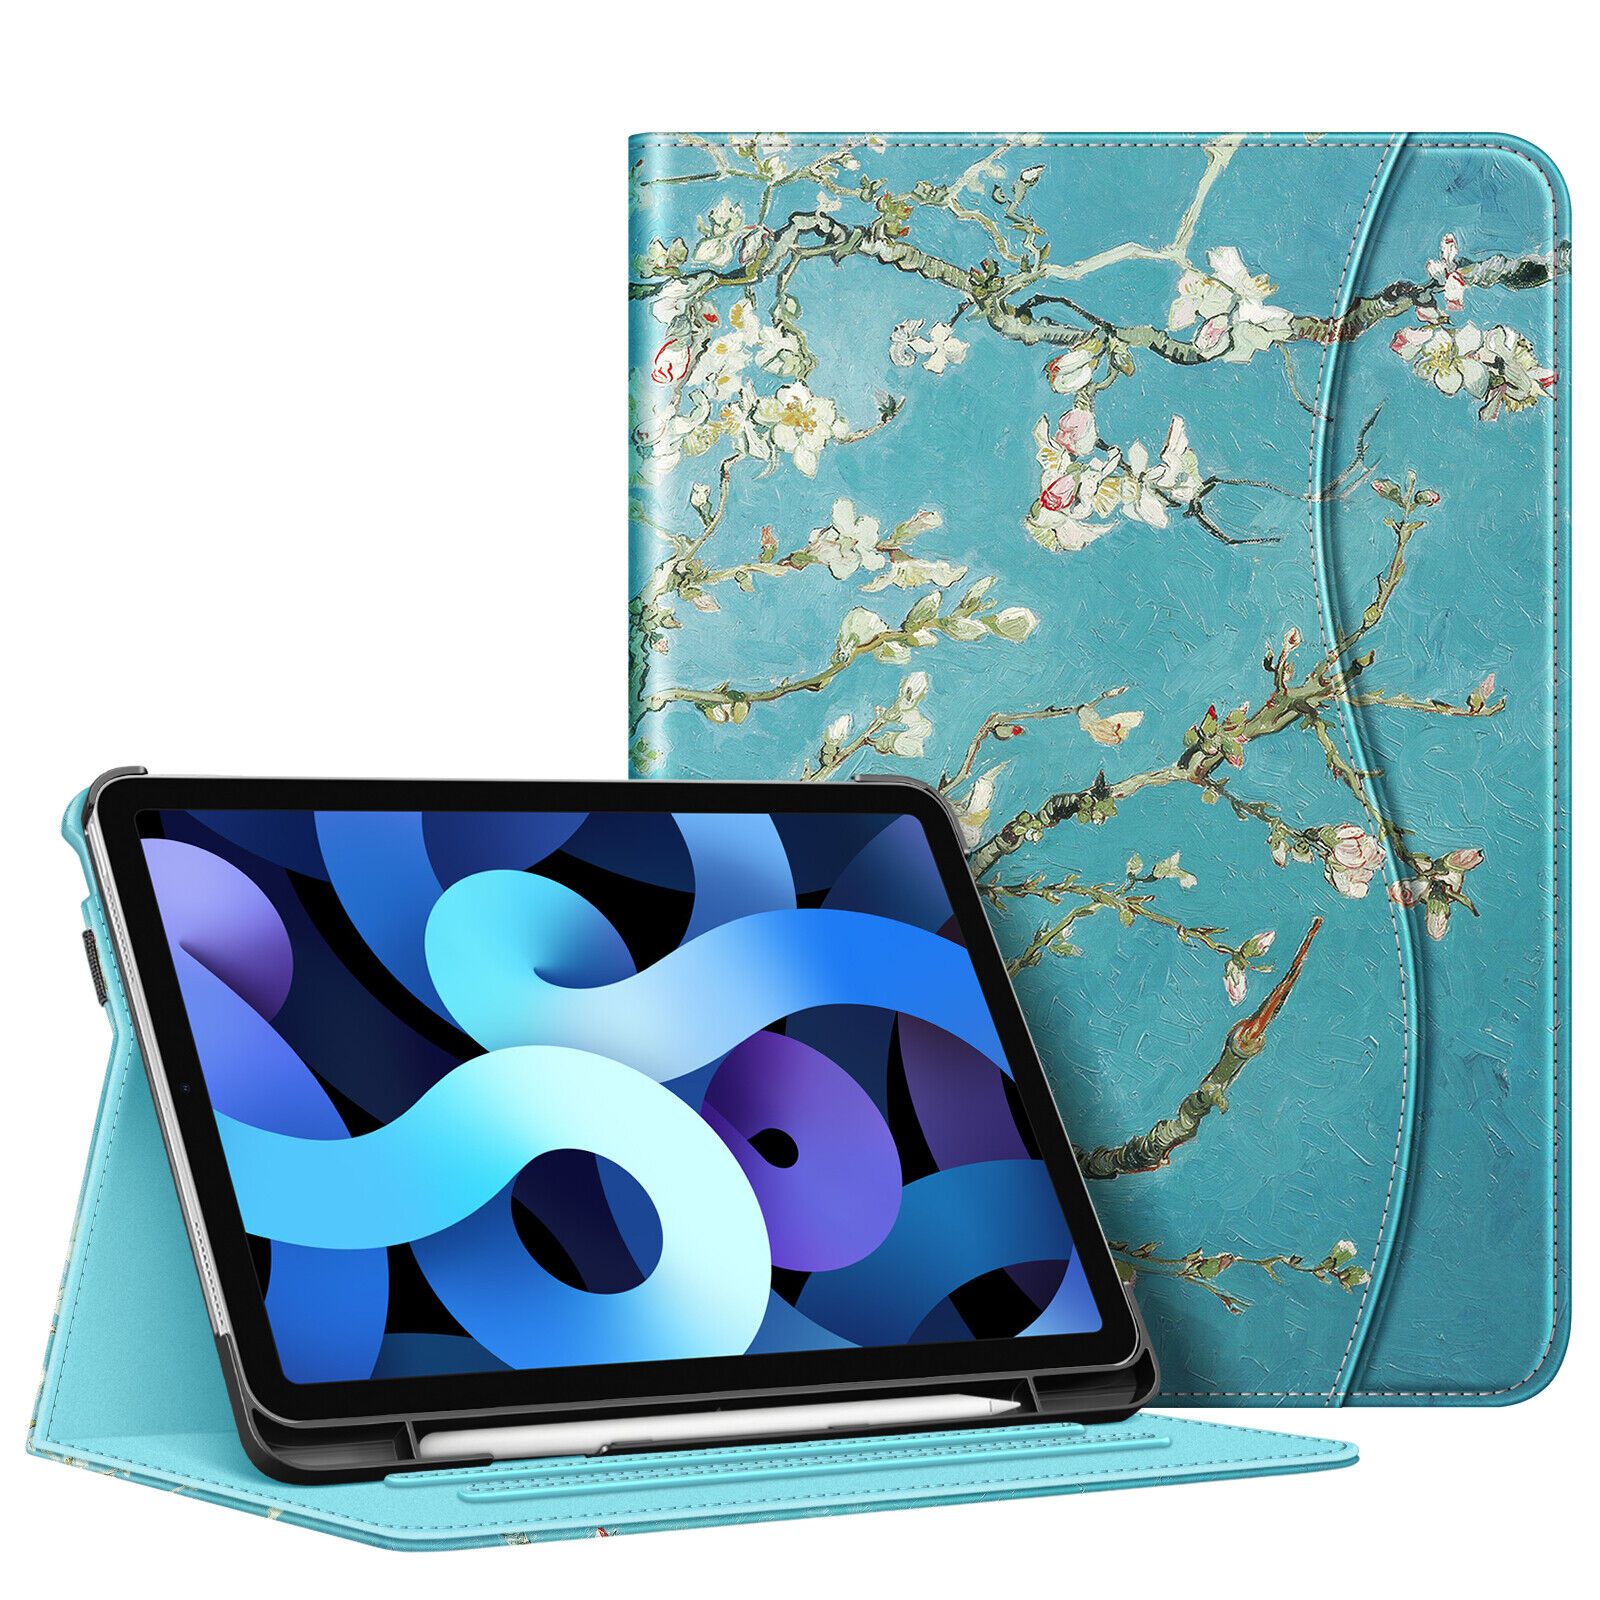 Multi-Angle Case For iPad Air 5th Gen 10.9